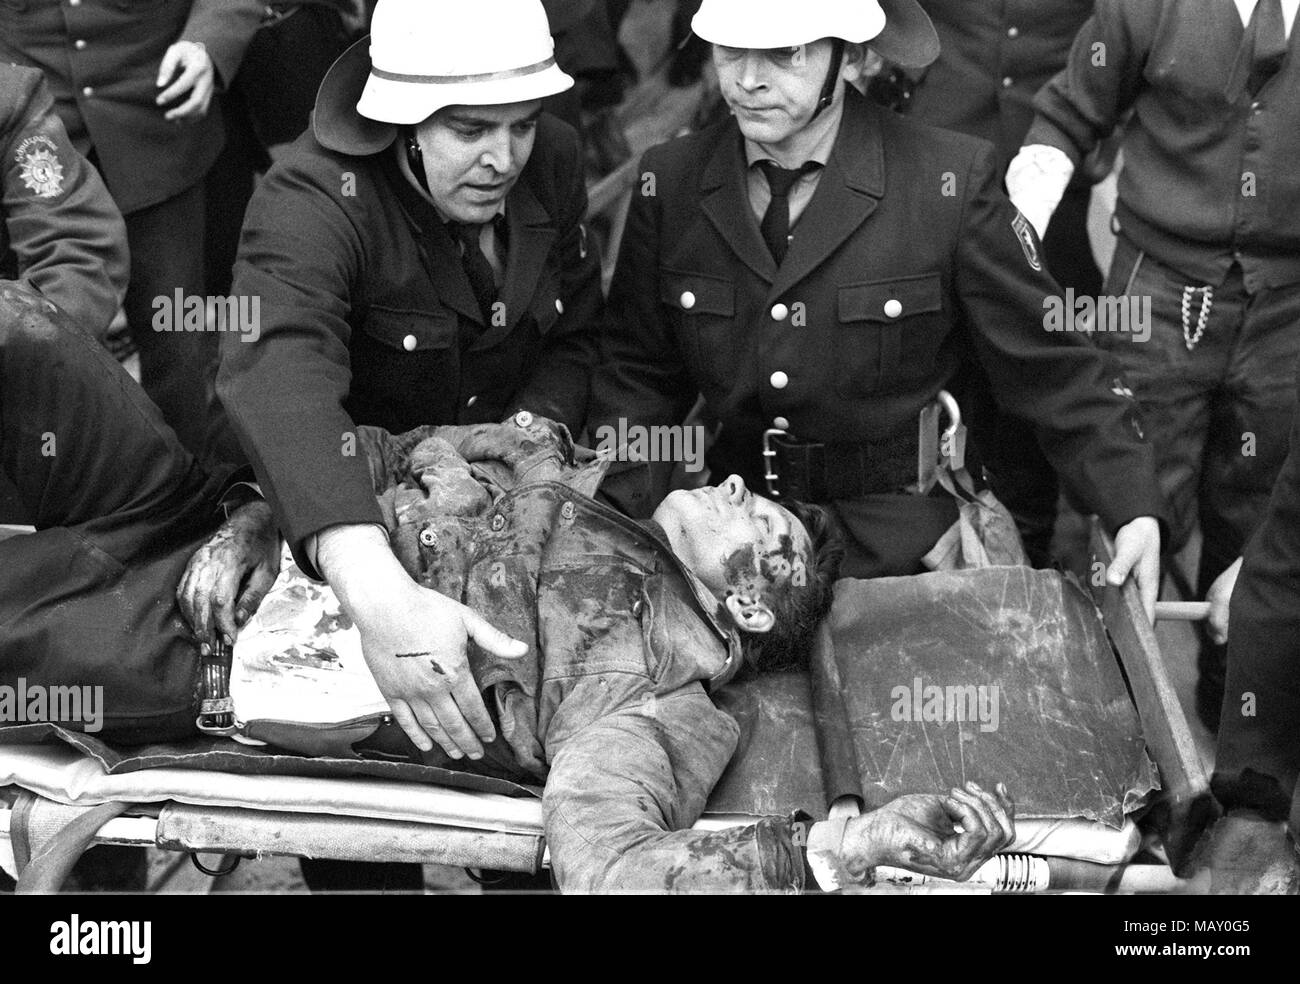 (dpa files) - The wounded assassin, Josef Bachmann, is laid on a stretcher by firemen after a shootout in West Berlin, 11 April 1968. Bachmann, a house painter, had shot Rudi Dutschke, the leader of the German socialist student association 'Sozialistischer Deutscher Studentenbund', in broad daylight on Kurfuerstendamm Street. Dutschke survived severely injured, but died on 24 December 1979 as a late result of the shooting. | usage worldwide Stock Photo